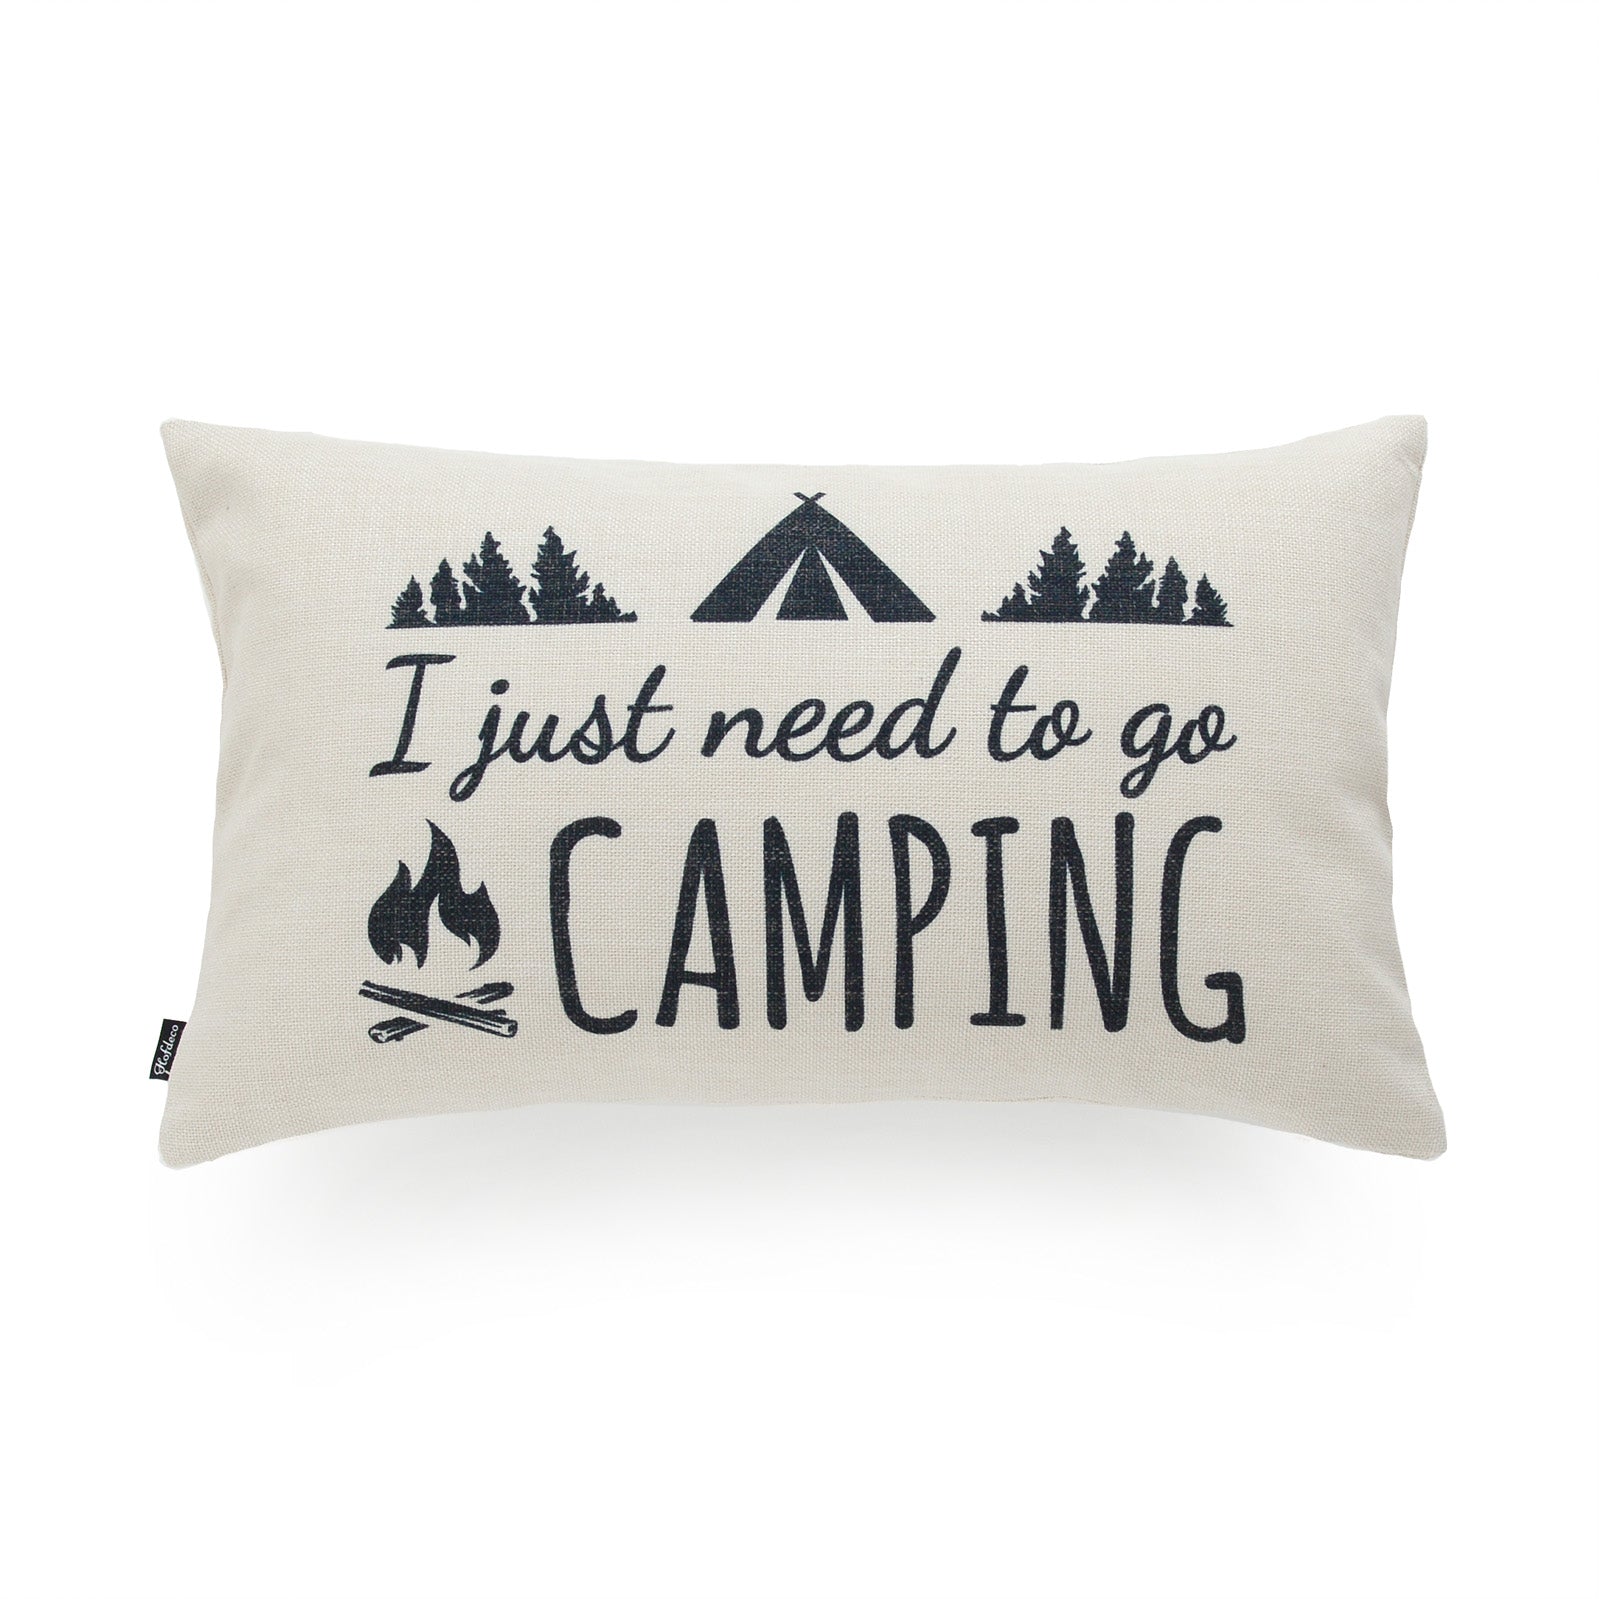 I Just Need To Go Camping Lumbar Pillow Cover, 12"x20"